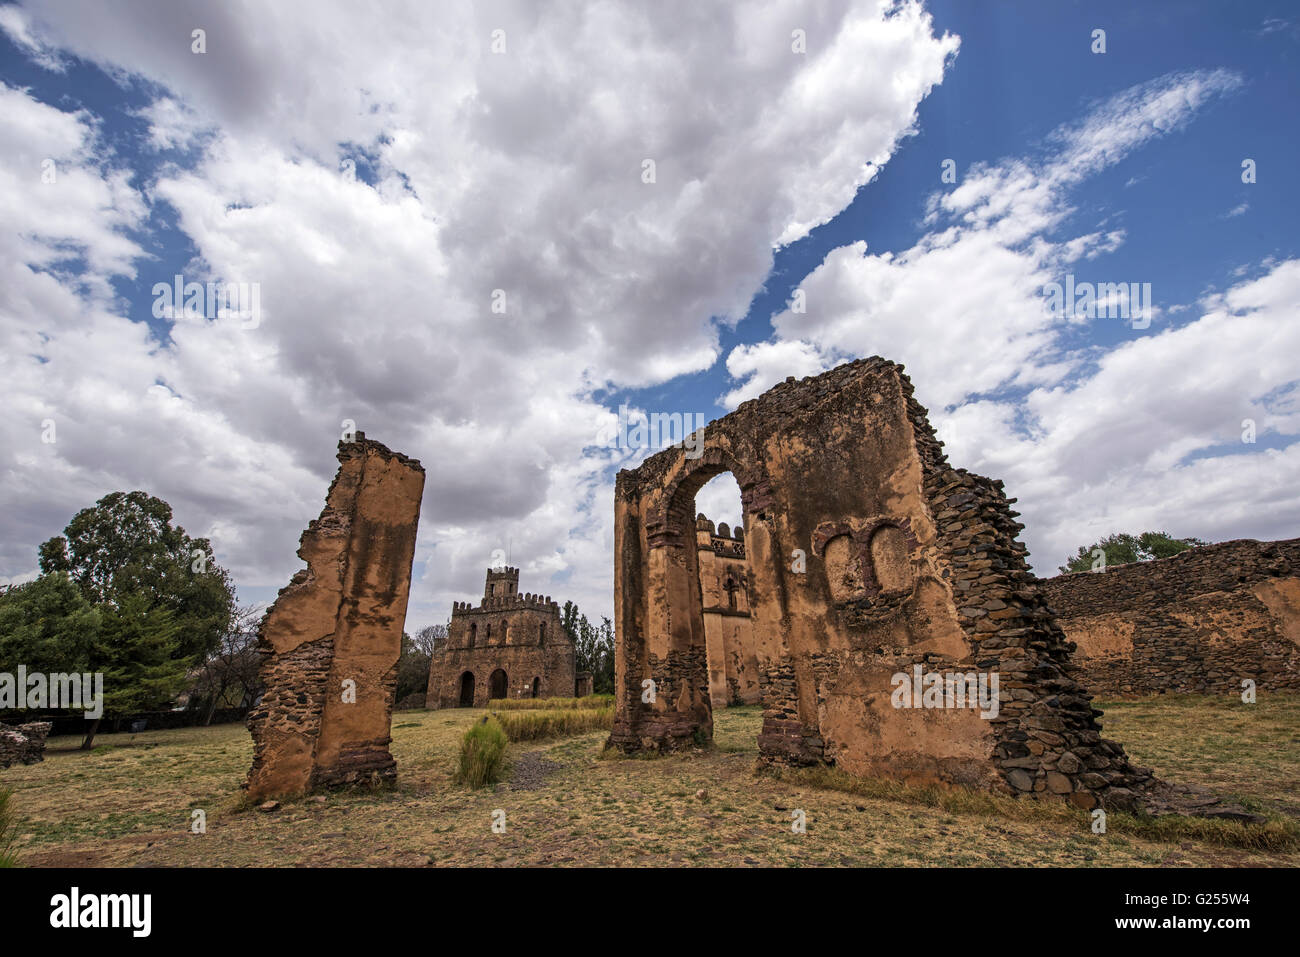 Royal Enclosure castle and other historical monuments Gondar, Ethiopia Stock Photo